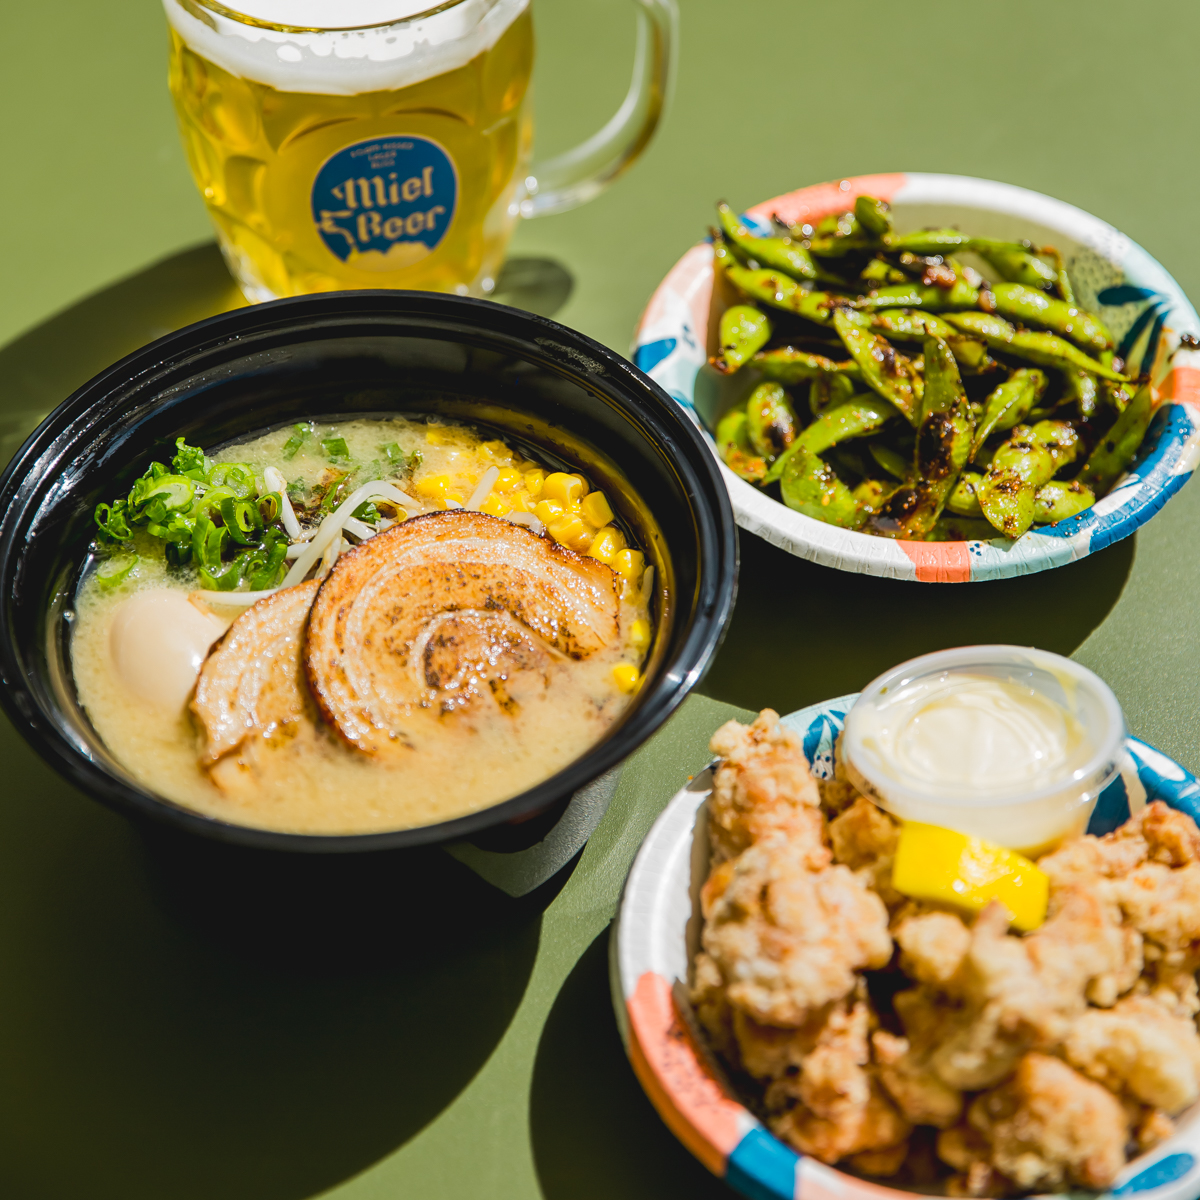 Shimeno Ramen with Miel beer and kaarage chicken square